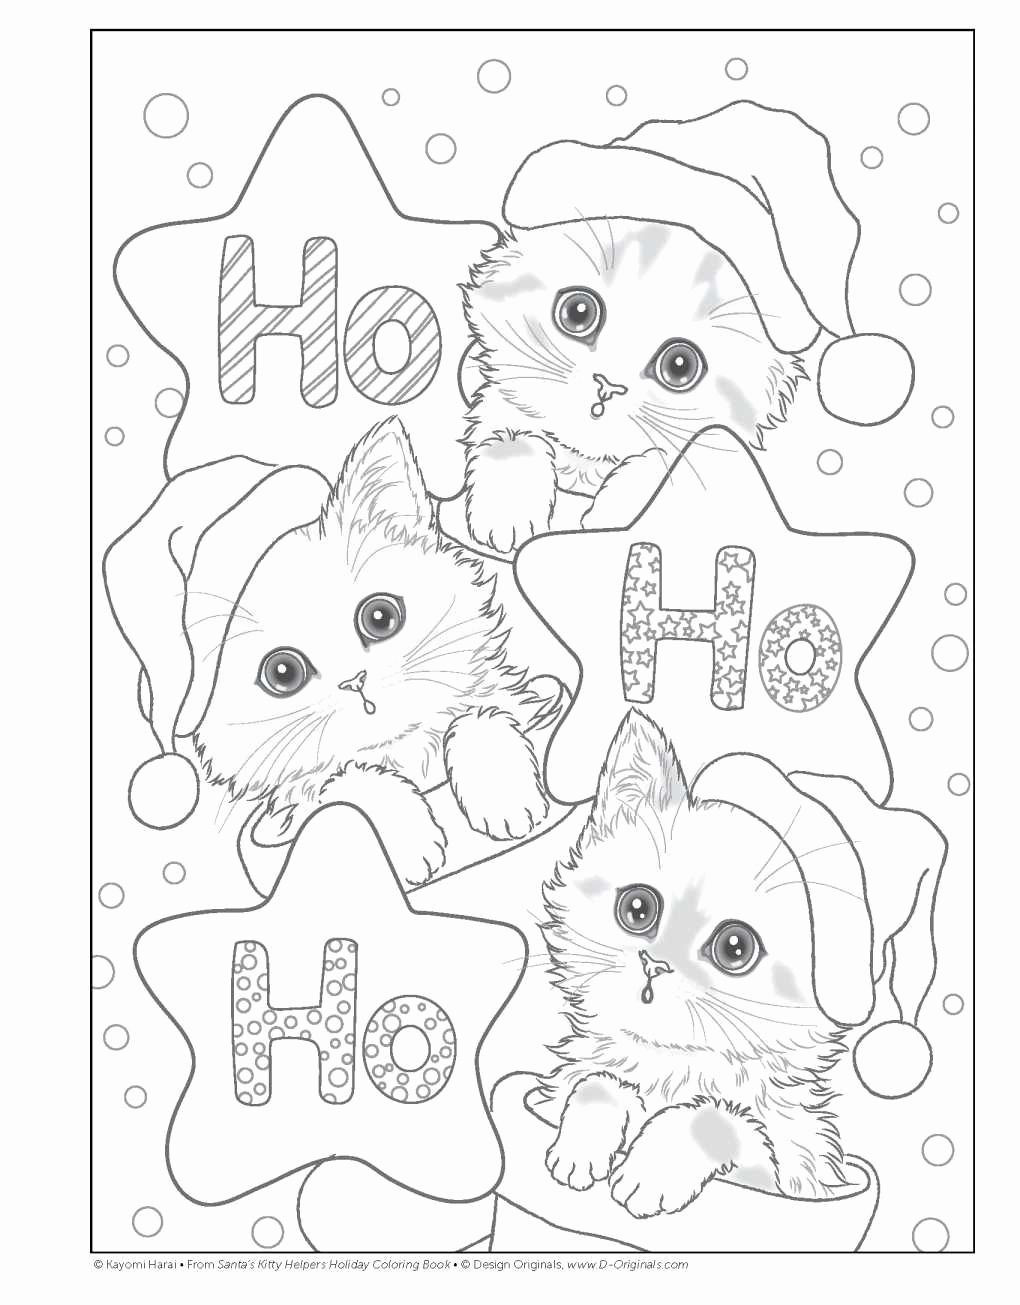 Cat With Kittens Free Coloring Pages : Free Printable Kitten Coloring